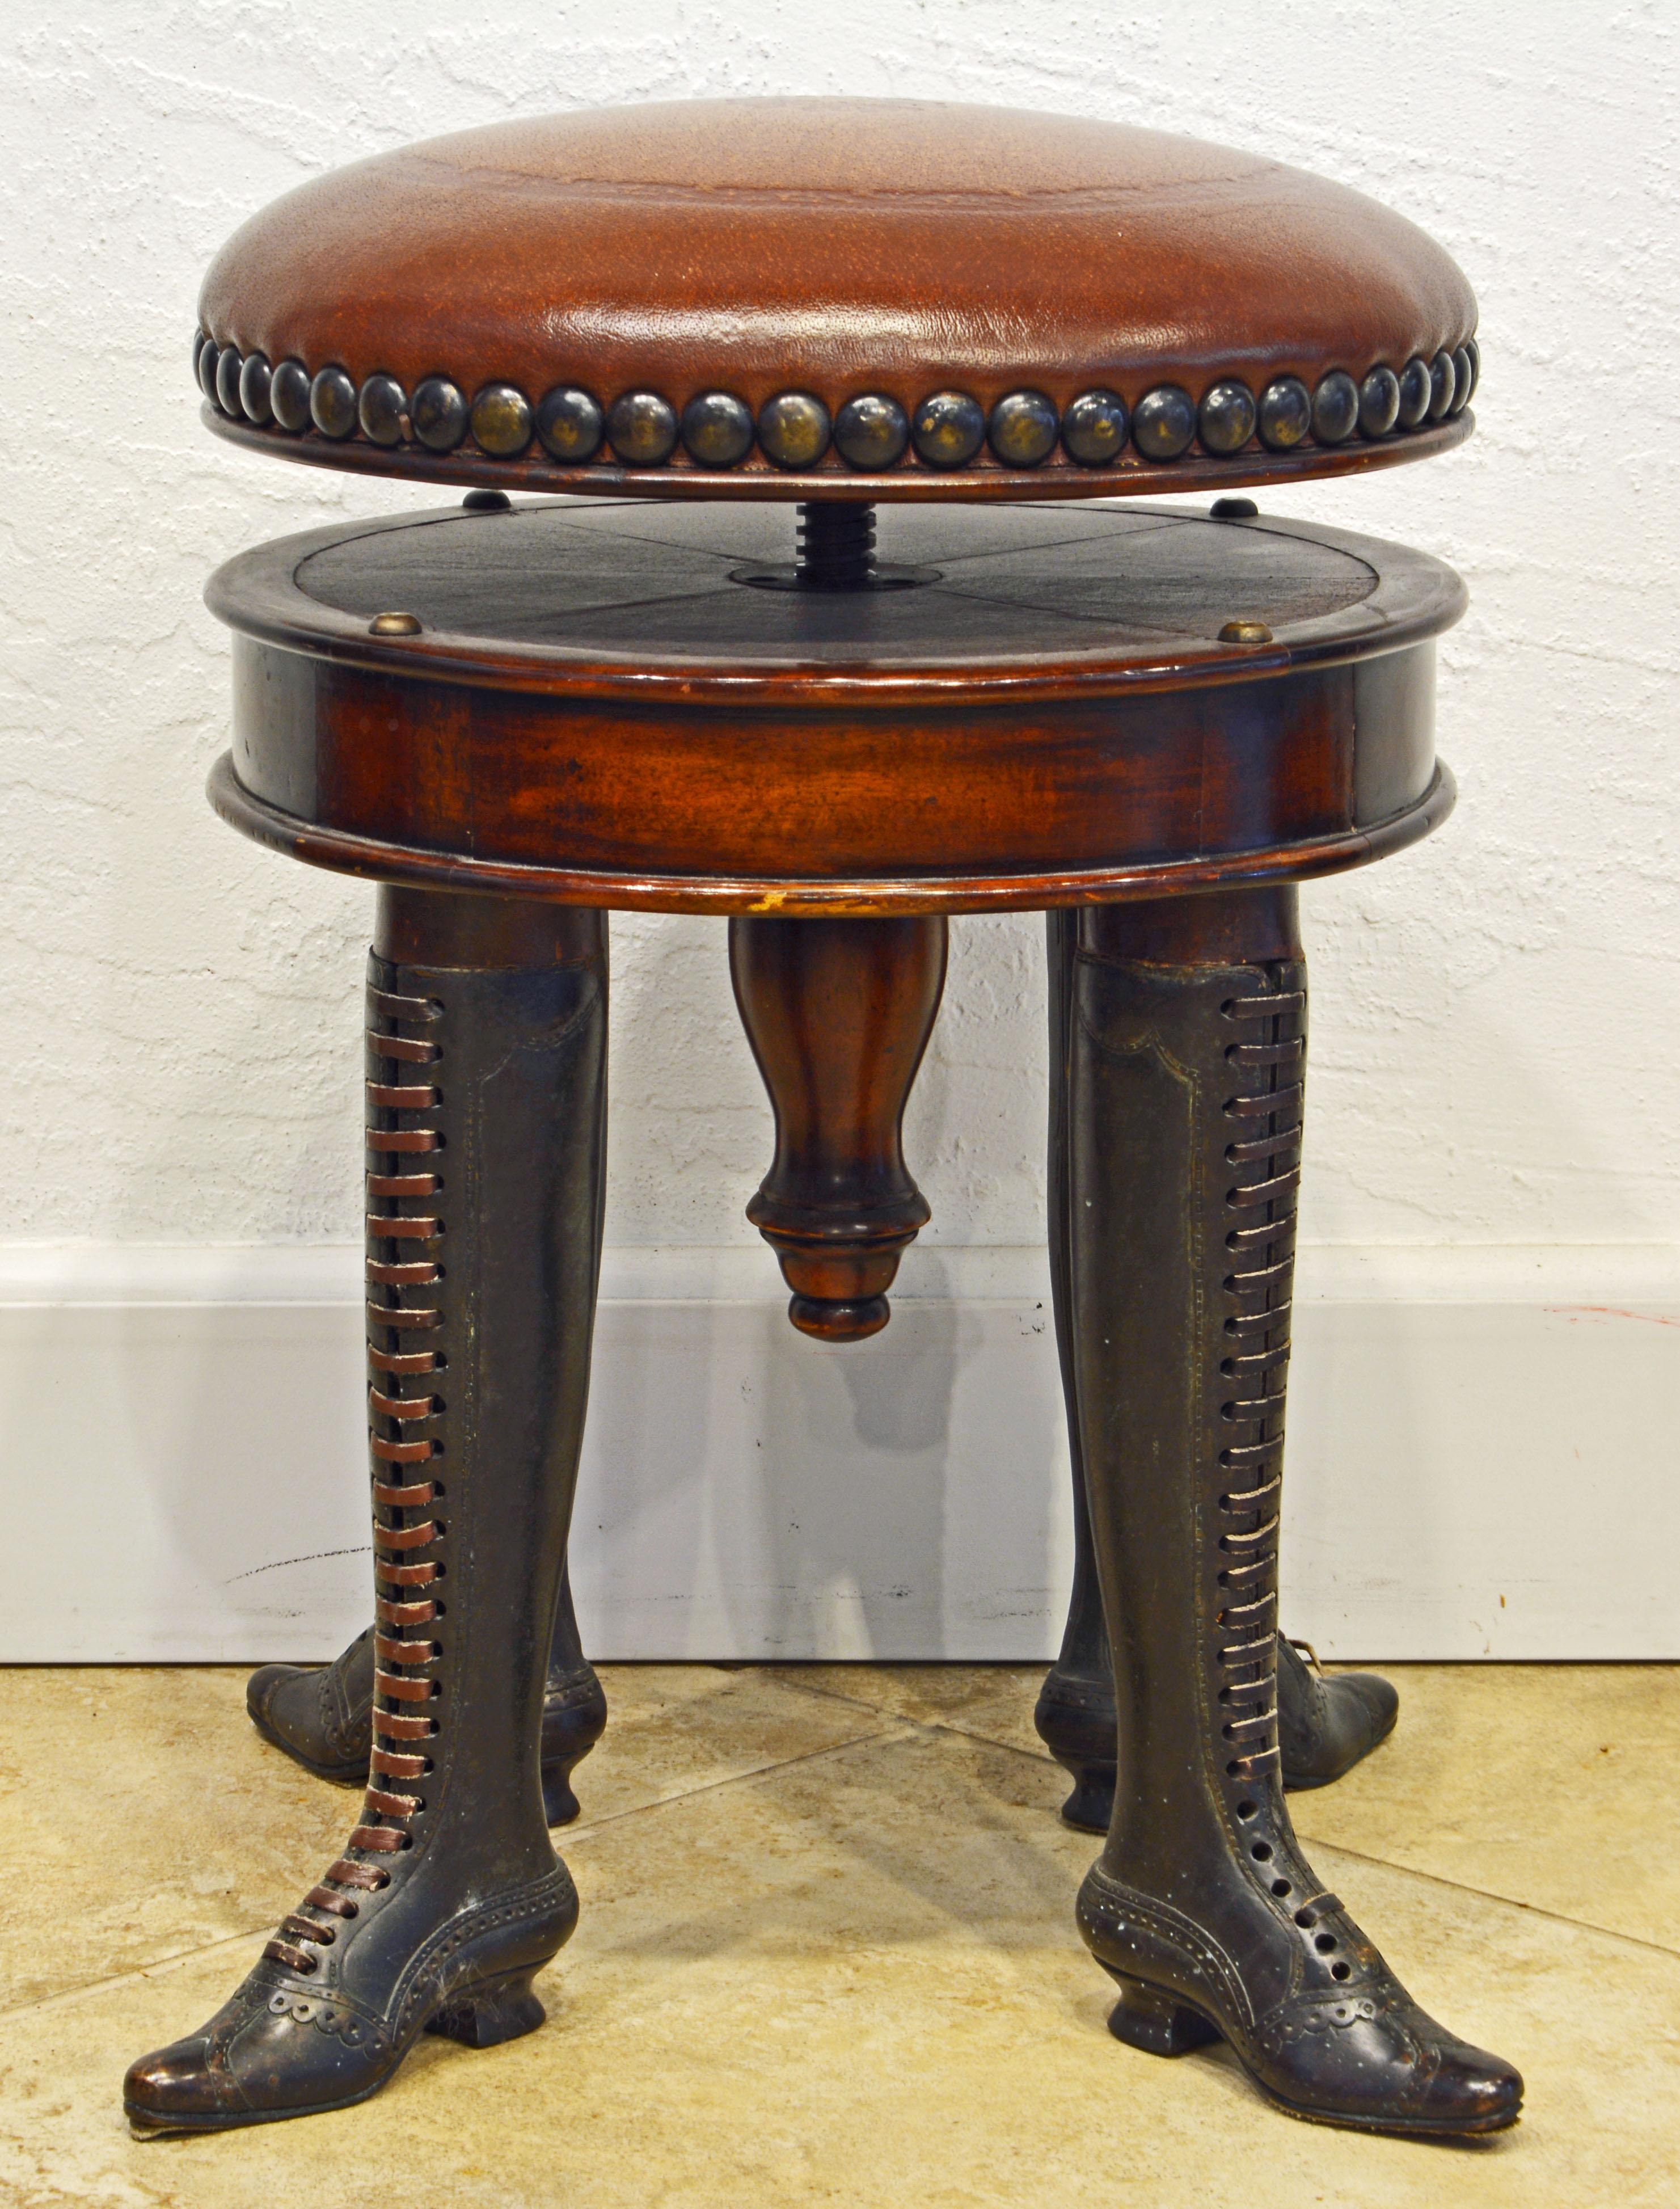 Belle Époque French Adjustable Leather Piano Stool on Bronze Legs in He Form of Ladies Boots